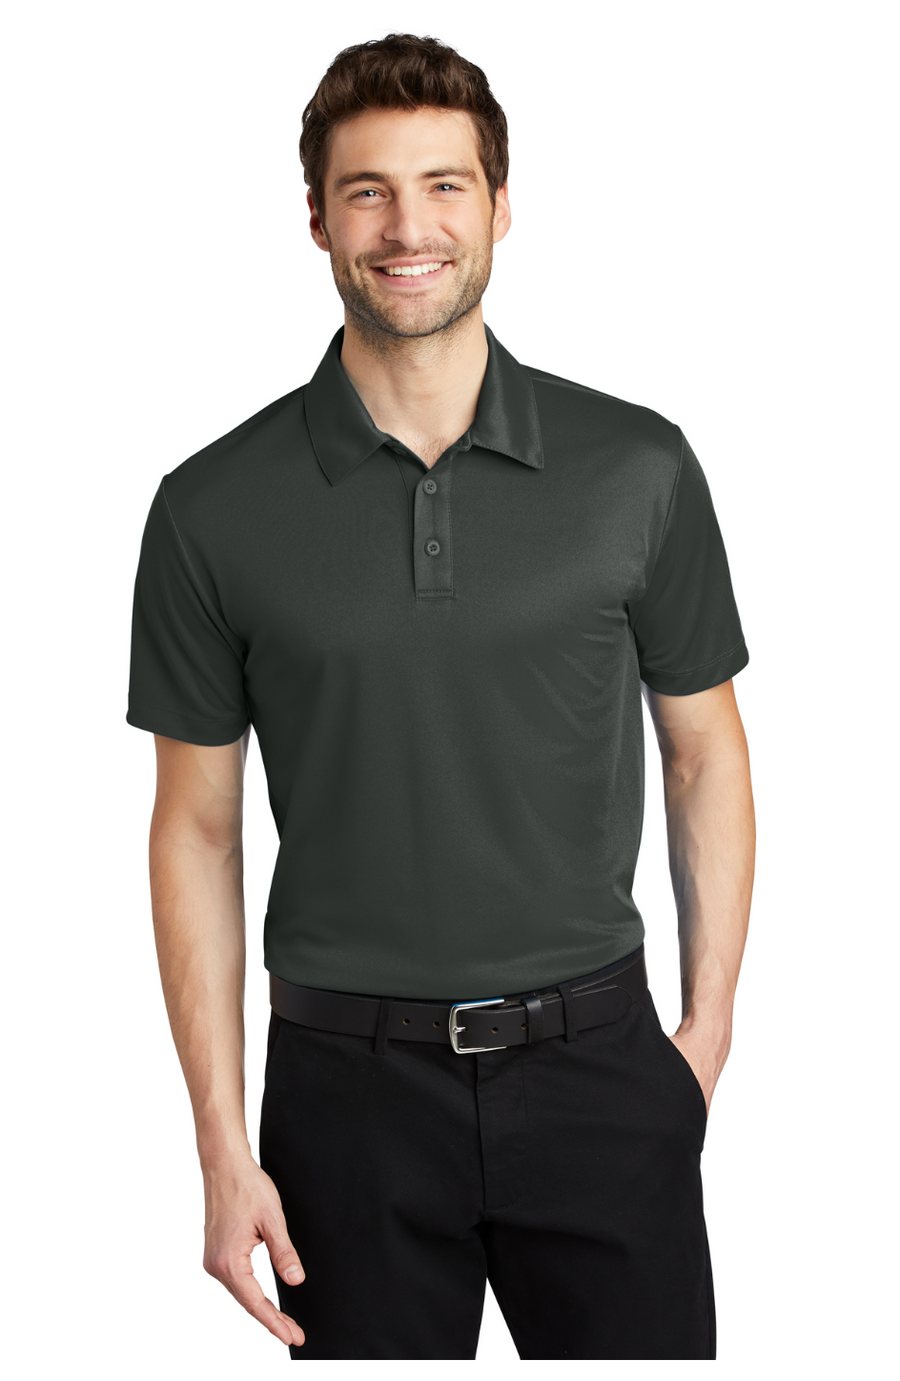 Authority Port Authority Silk Touch Polo (Preorder)